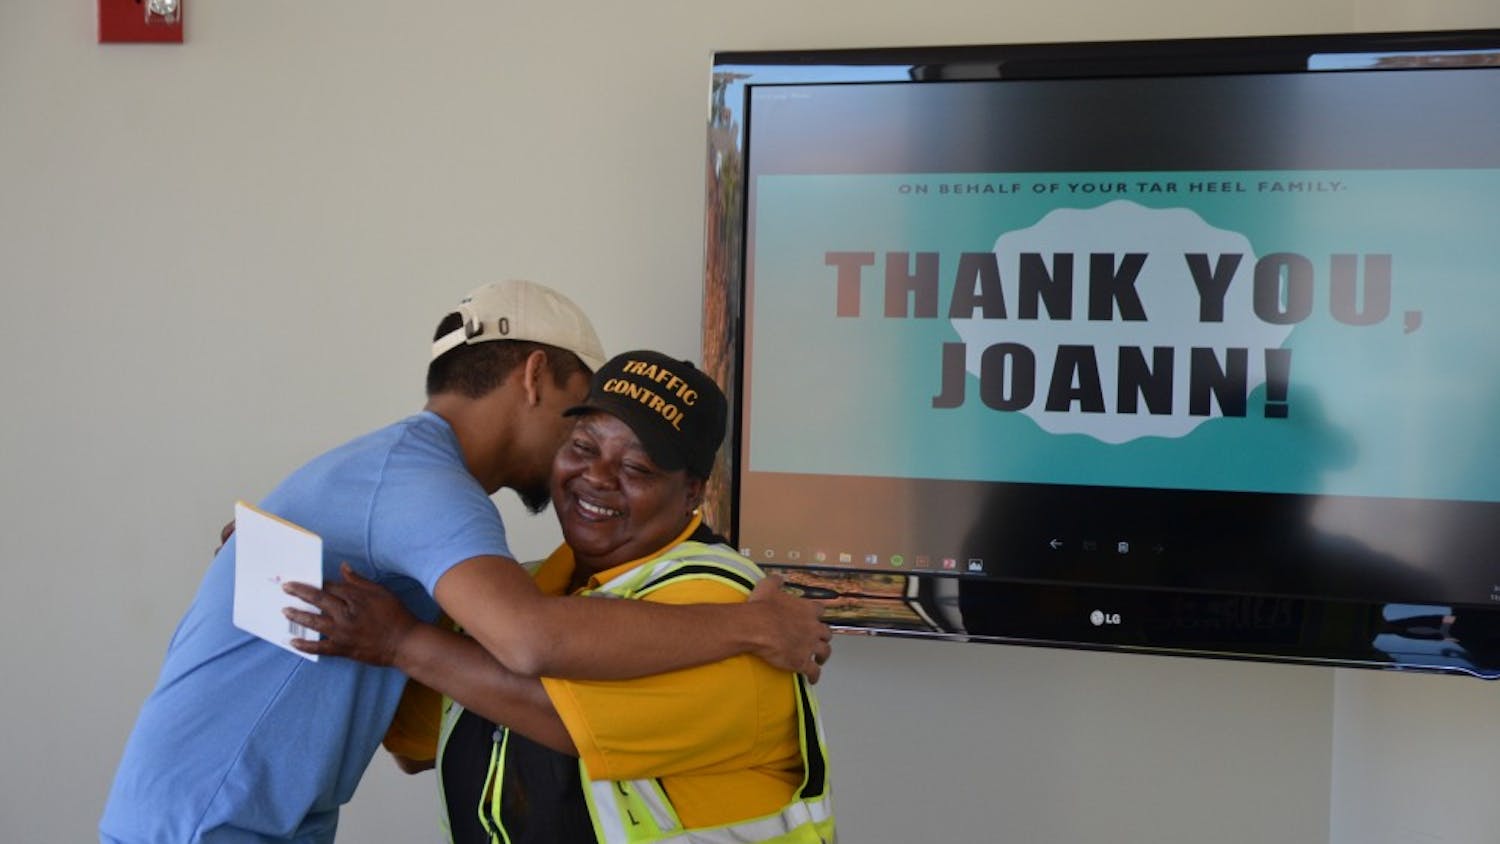 Crossing guard Joann Isom hugs UNC junior Carlos Salas after receiving money raised via GoFundMe for Isom to take a trip to visit her son. Salas set up the GoFundMe fundraiser after seeing Isom's story on the Humans of UNC Facebook page. 